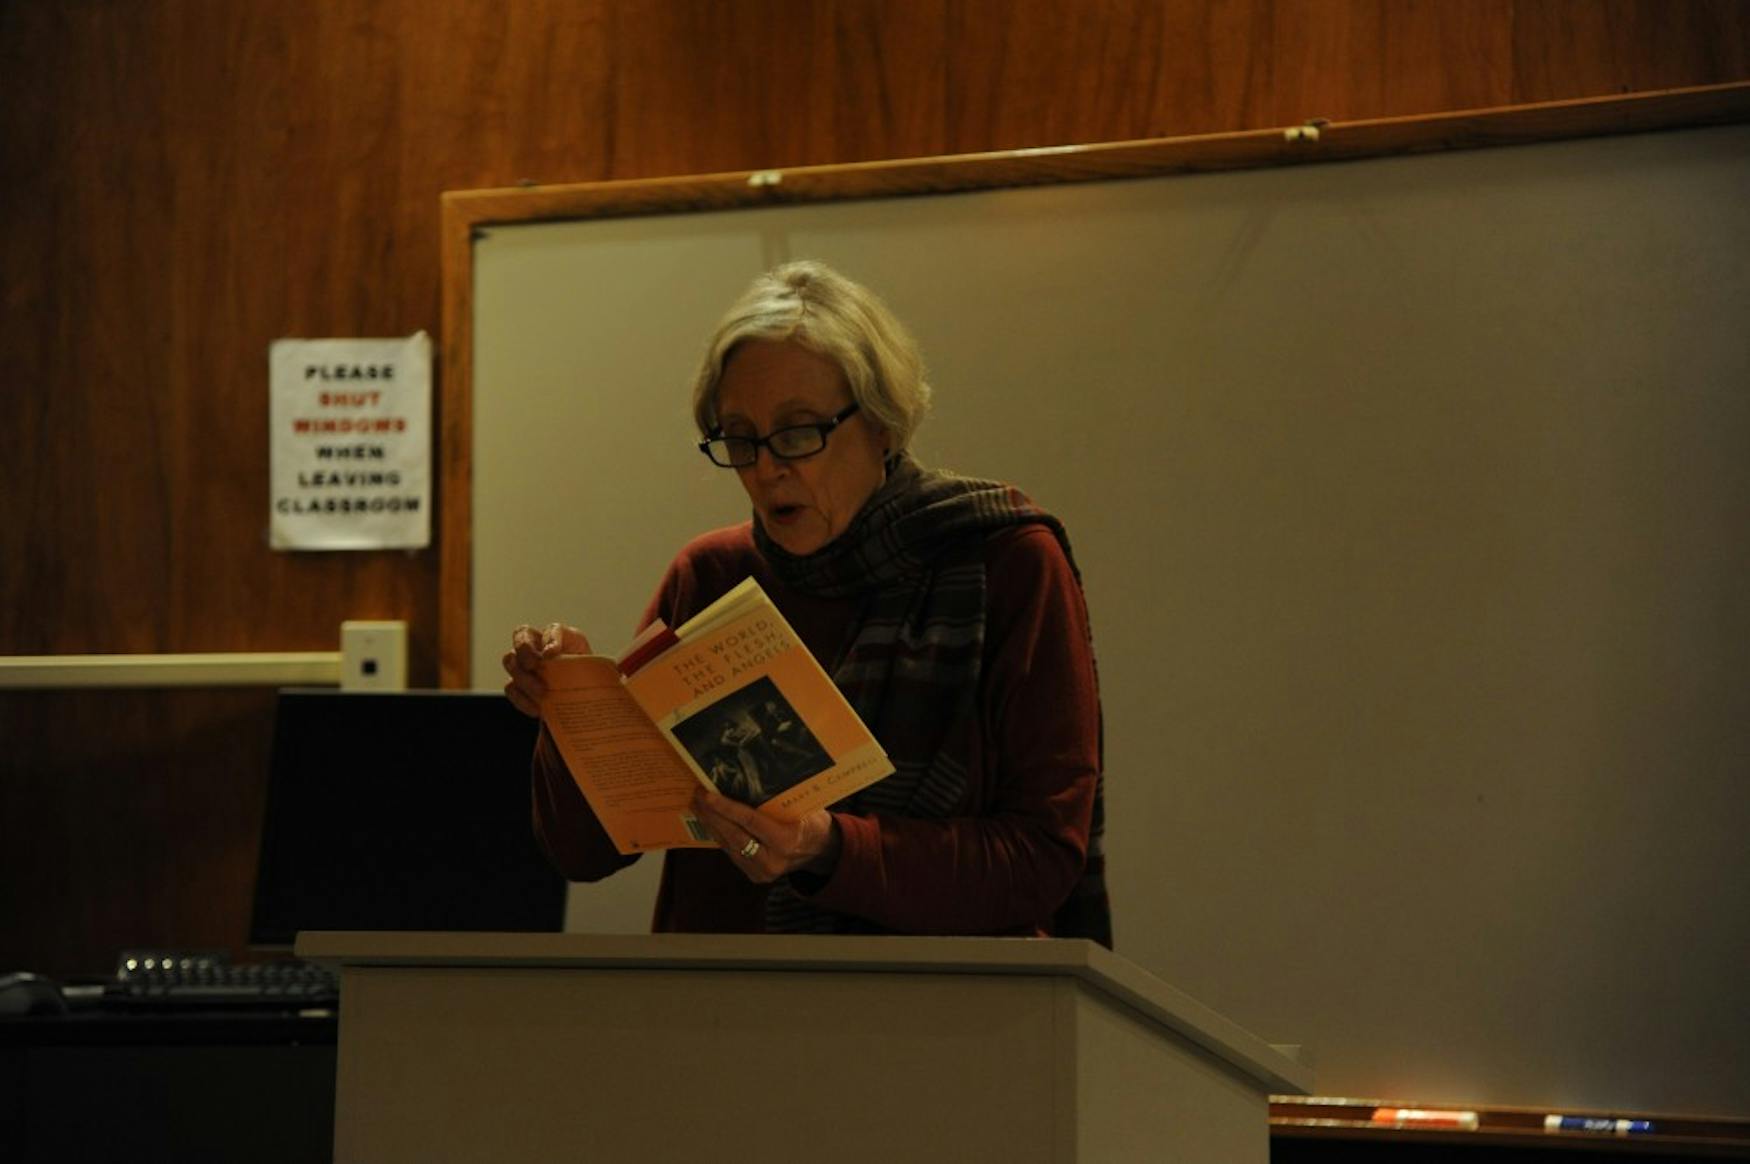 TROUBLE: Prof. Mary Baine Campbell (ENG) read from her book Trouble; her selection included poems about global warming, love, marriage, the oldest species of fish, censorship, and philosopher Descartes.